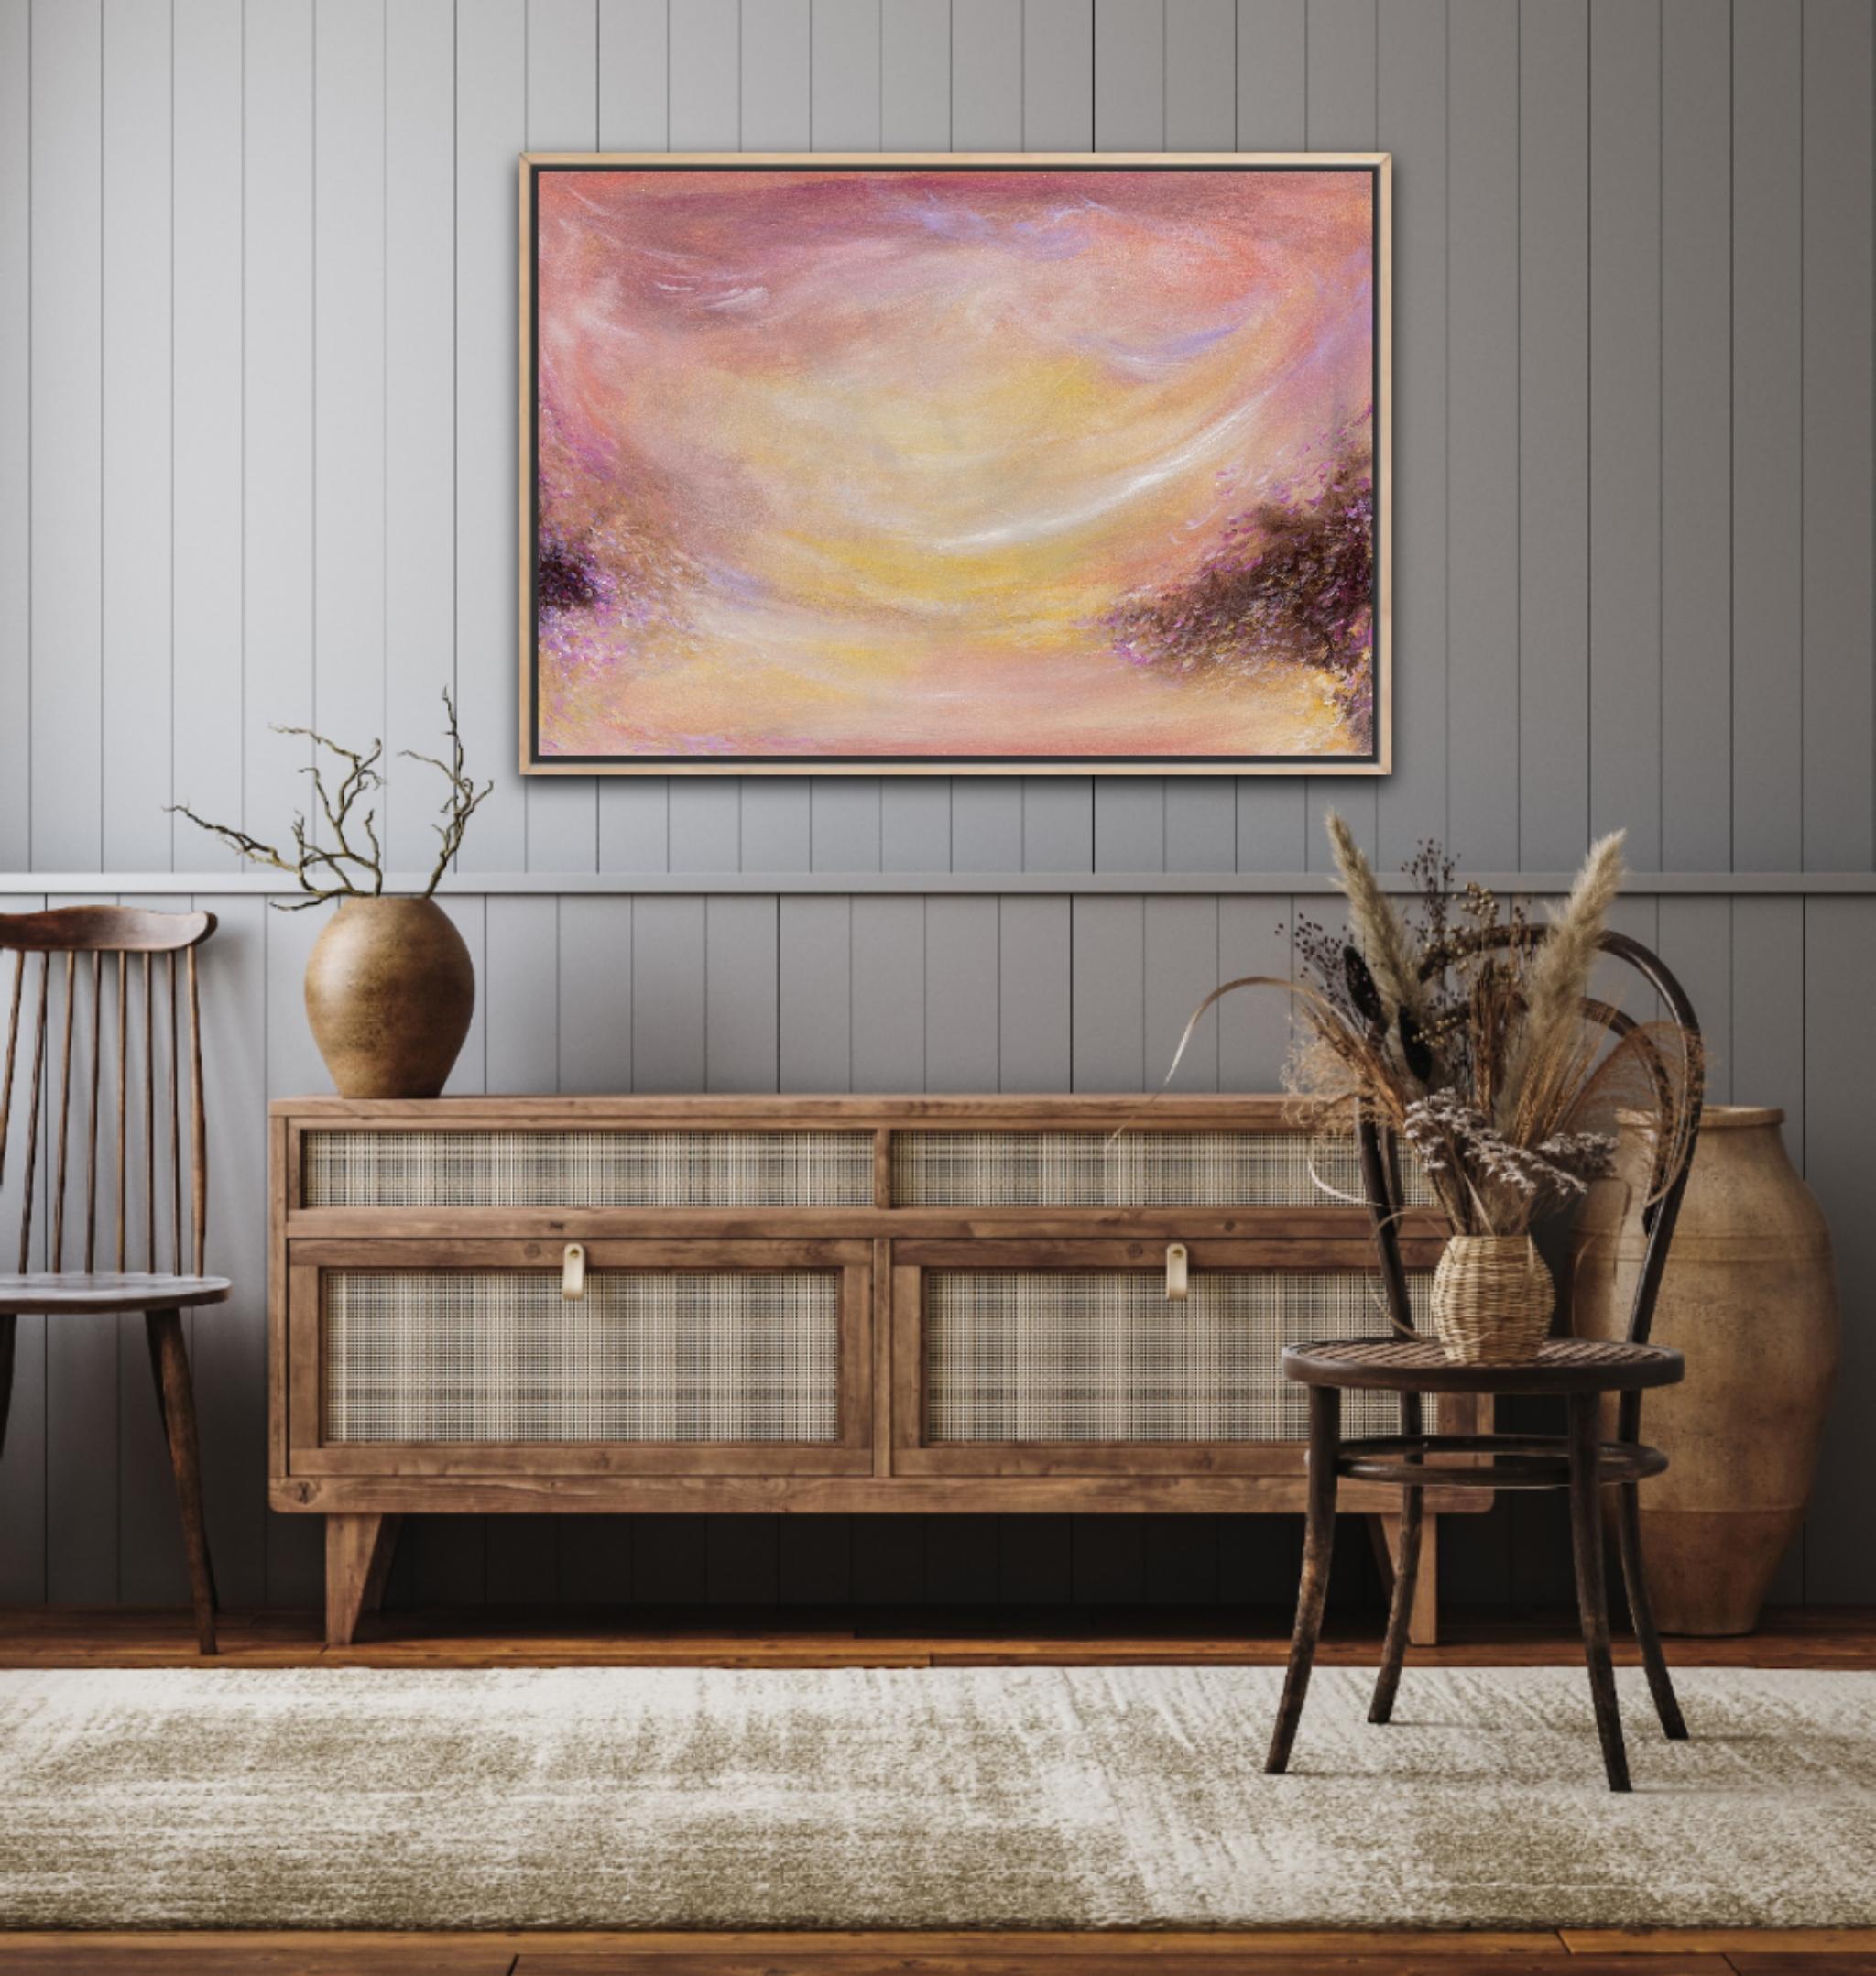 Ballad of the wind - Abstract impressionist warm sunset painting For Sale 3